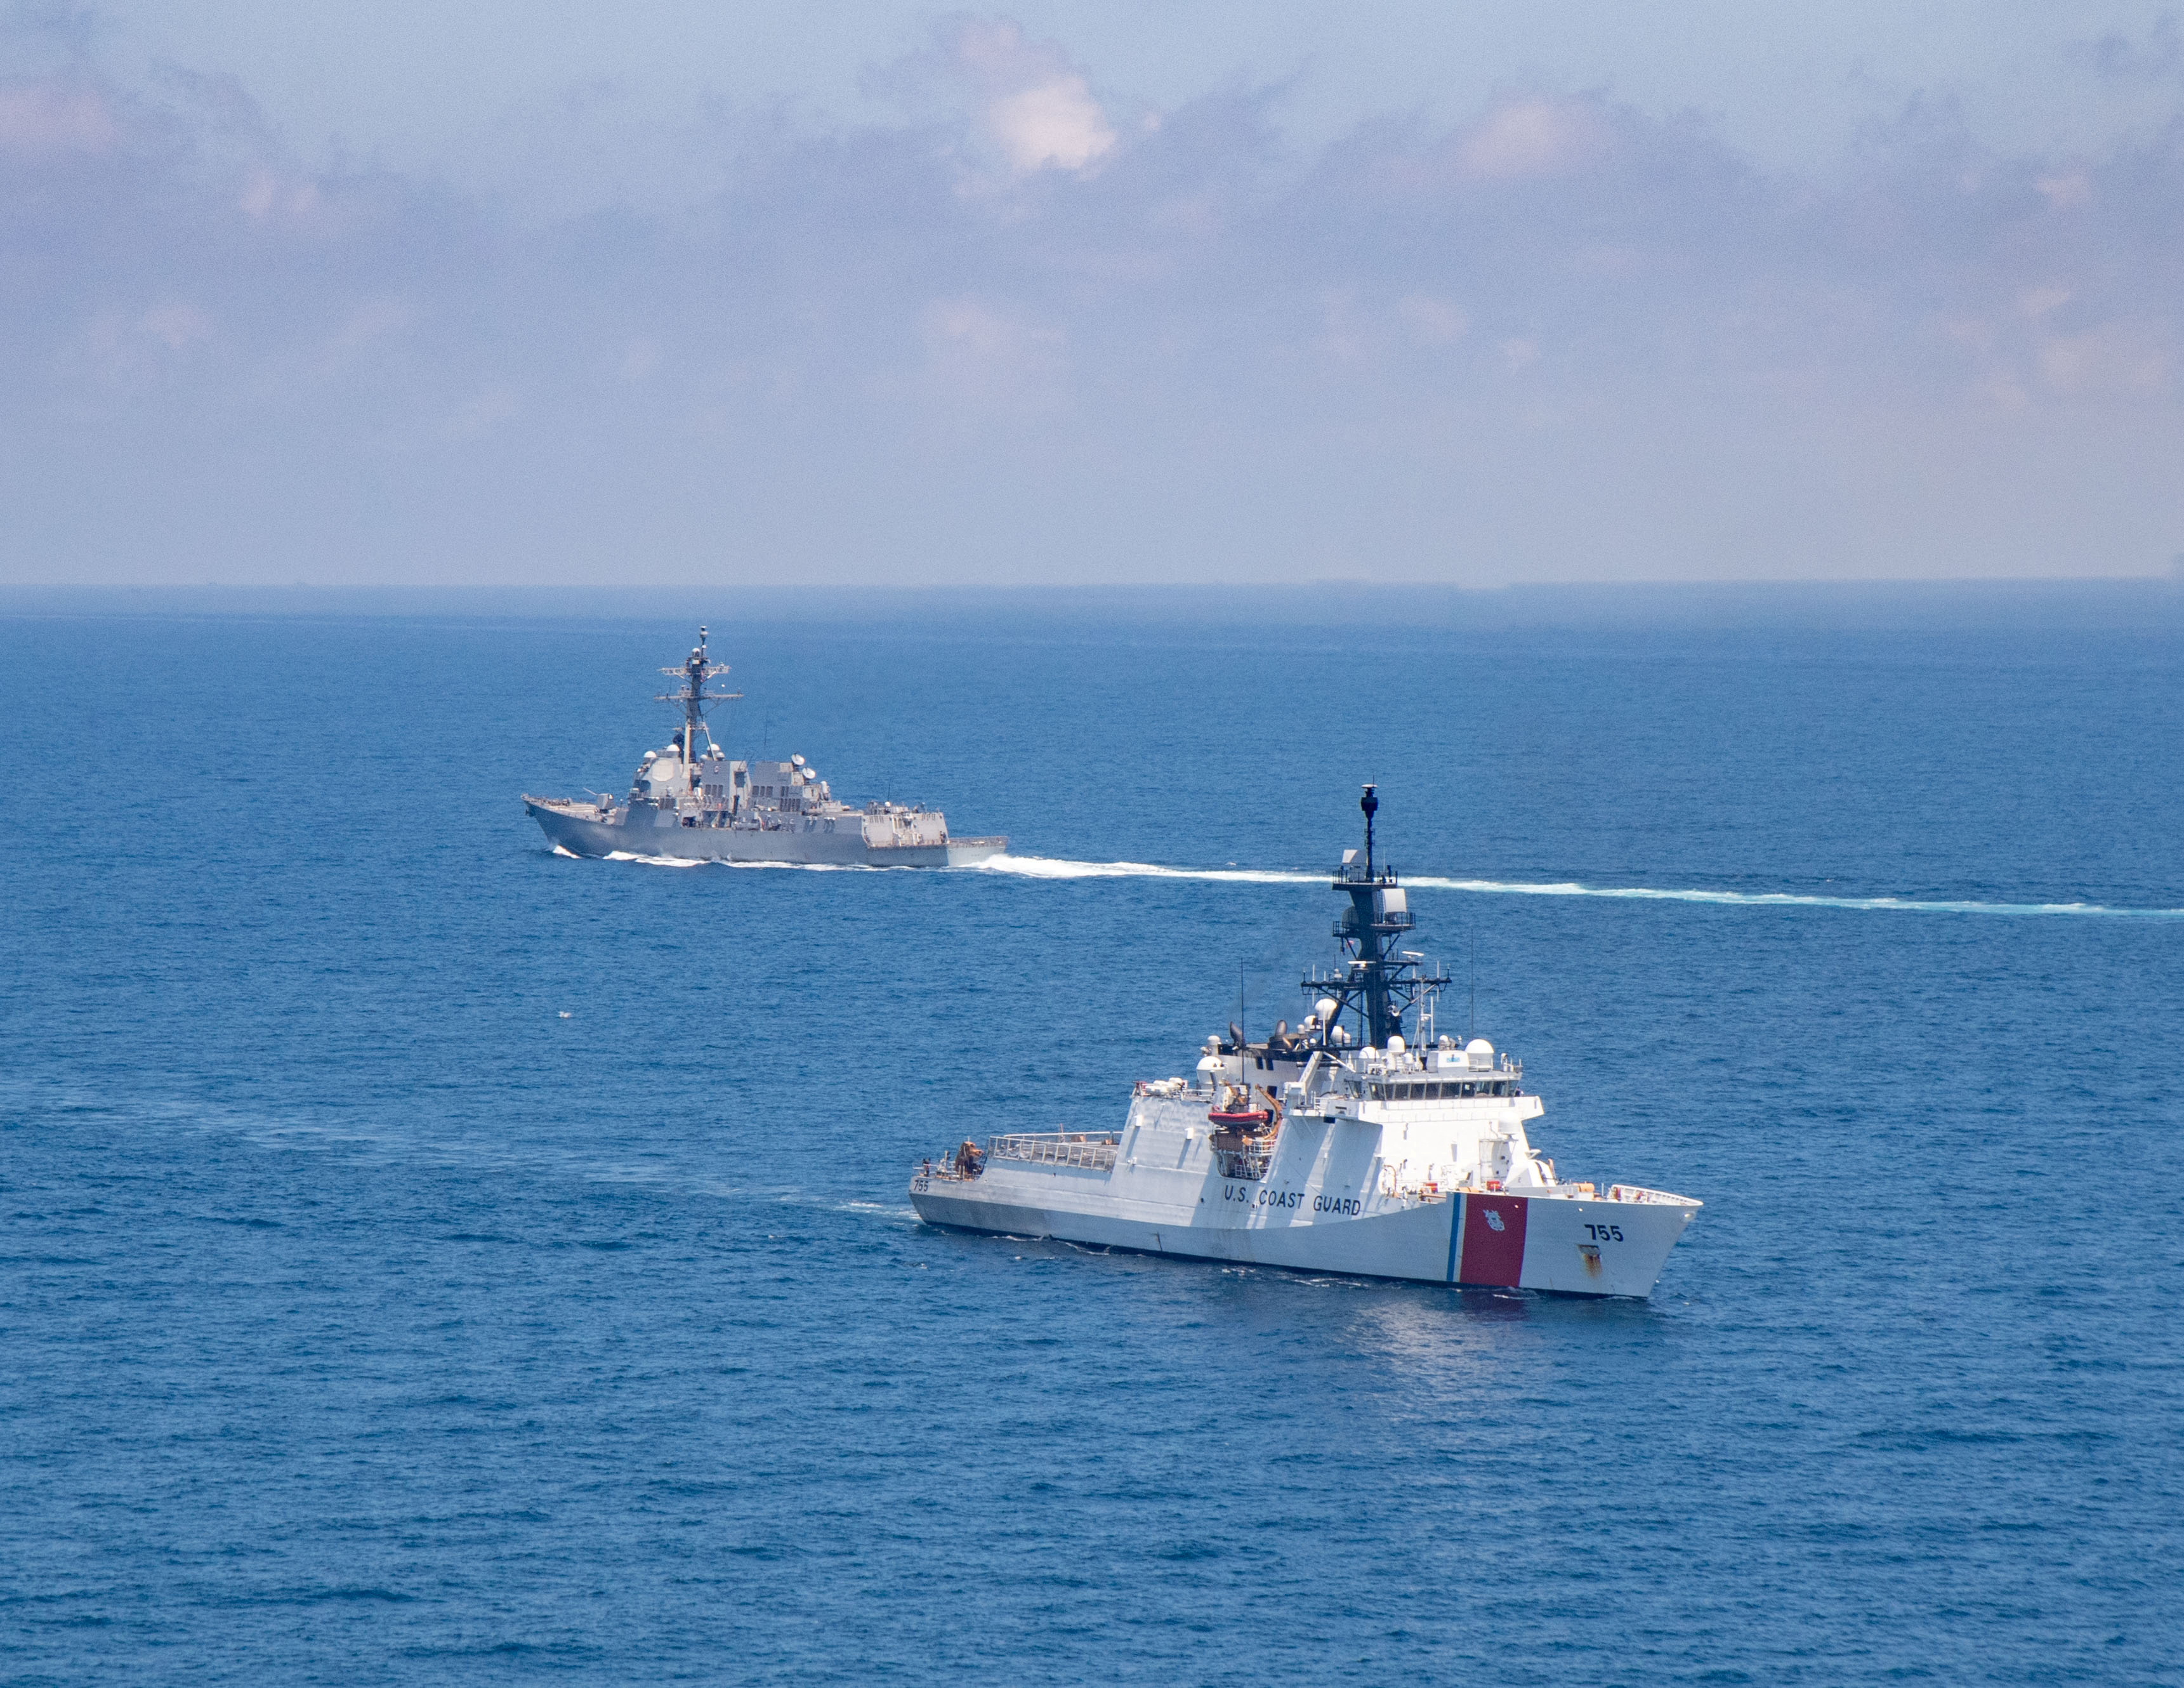 The Arleigh Burke-class guided-missile destroyer USS Kidd and legend-class U.S. Coast Guard National Security Cutter Munro conduct Taiwan Strait transits